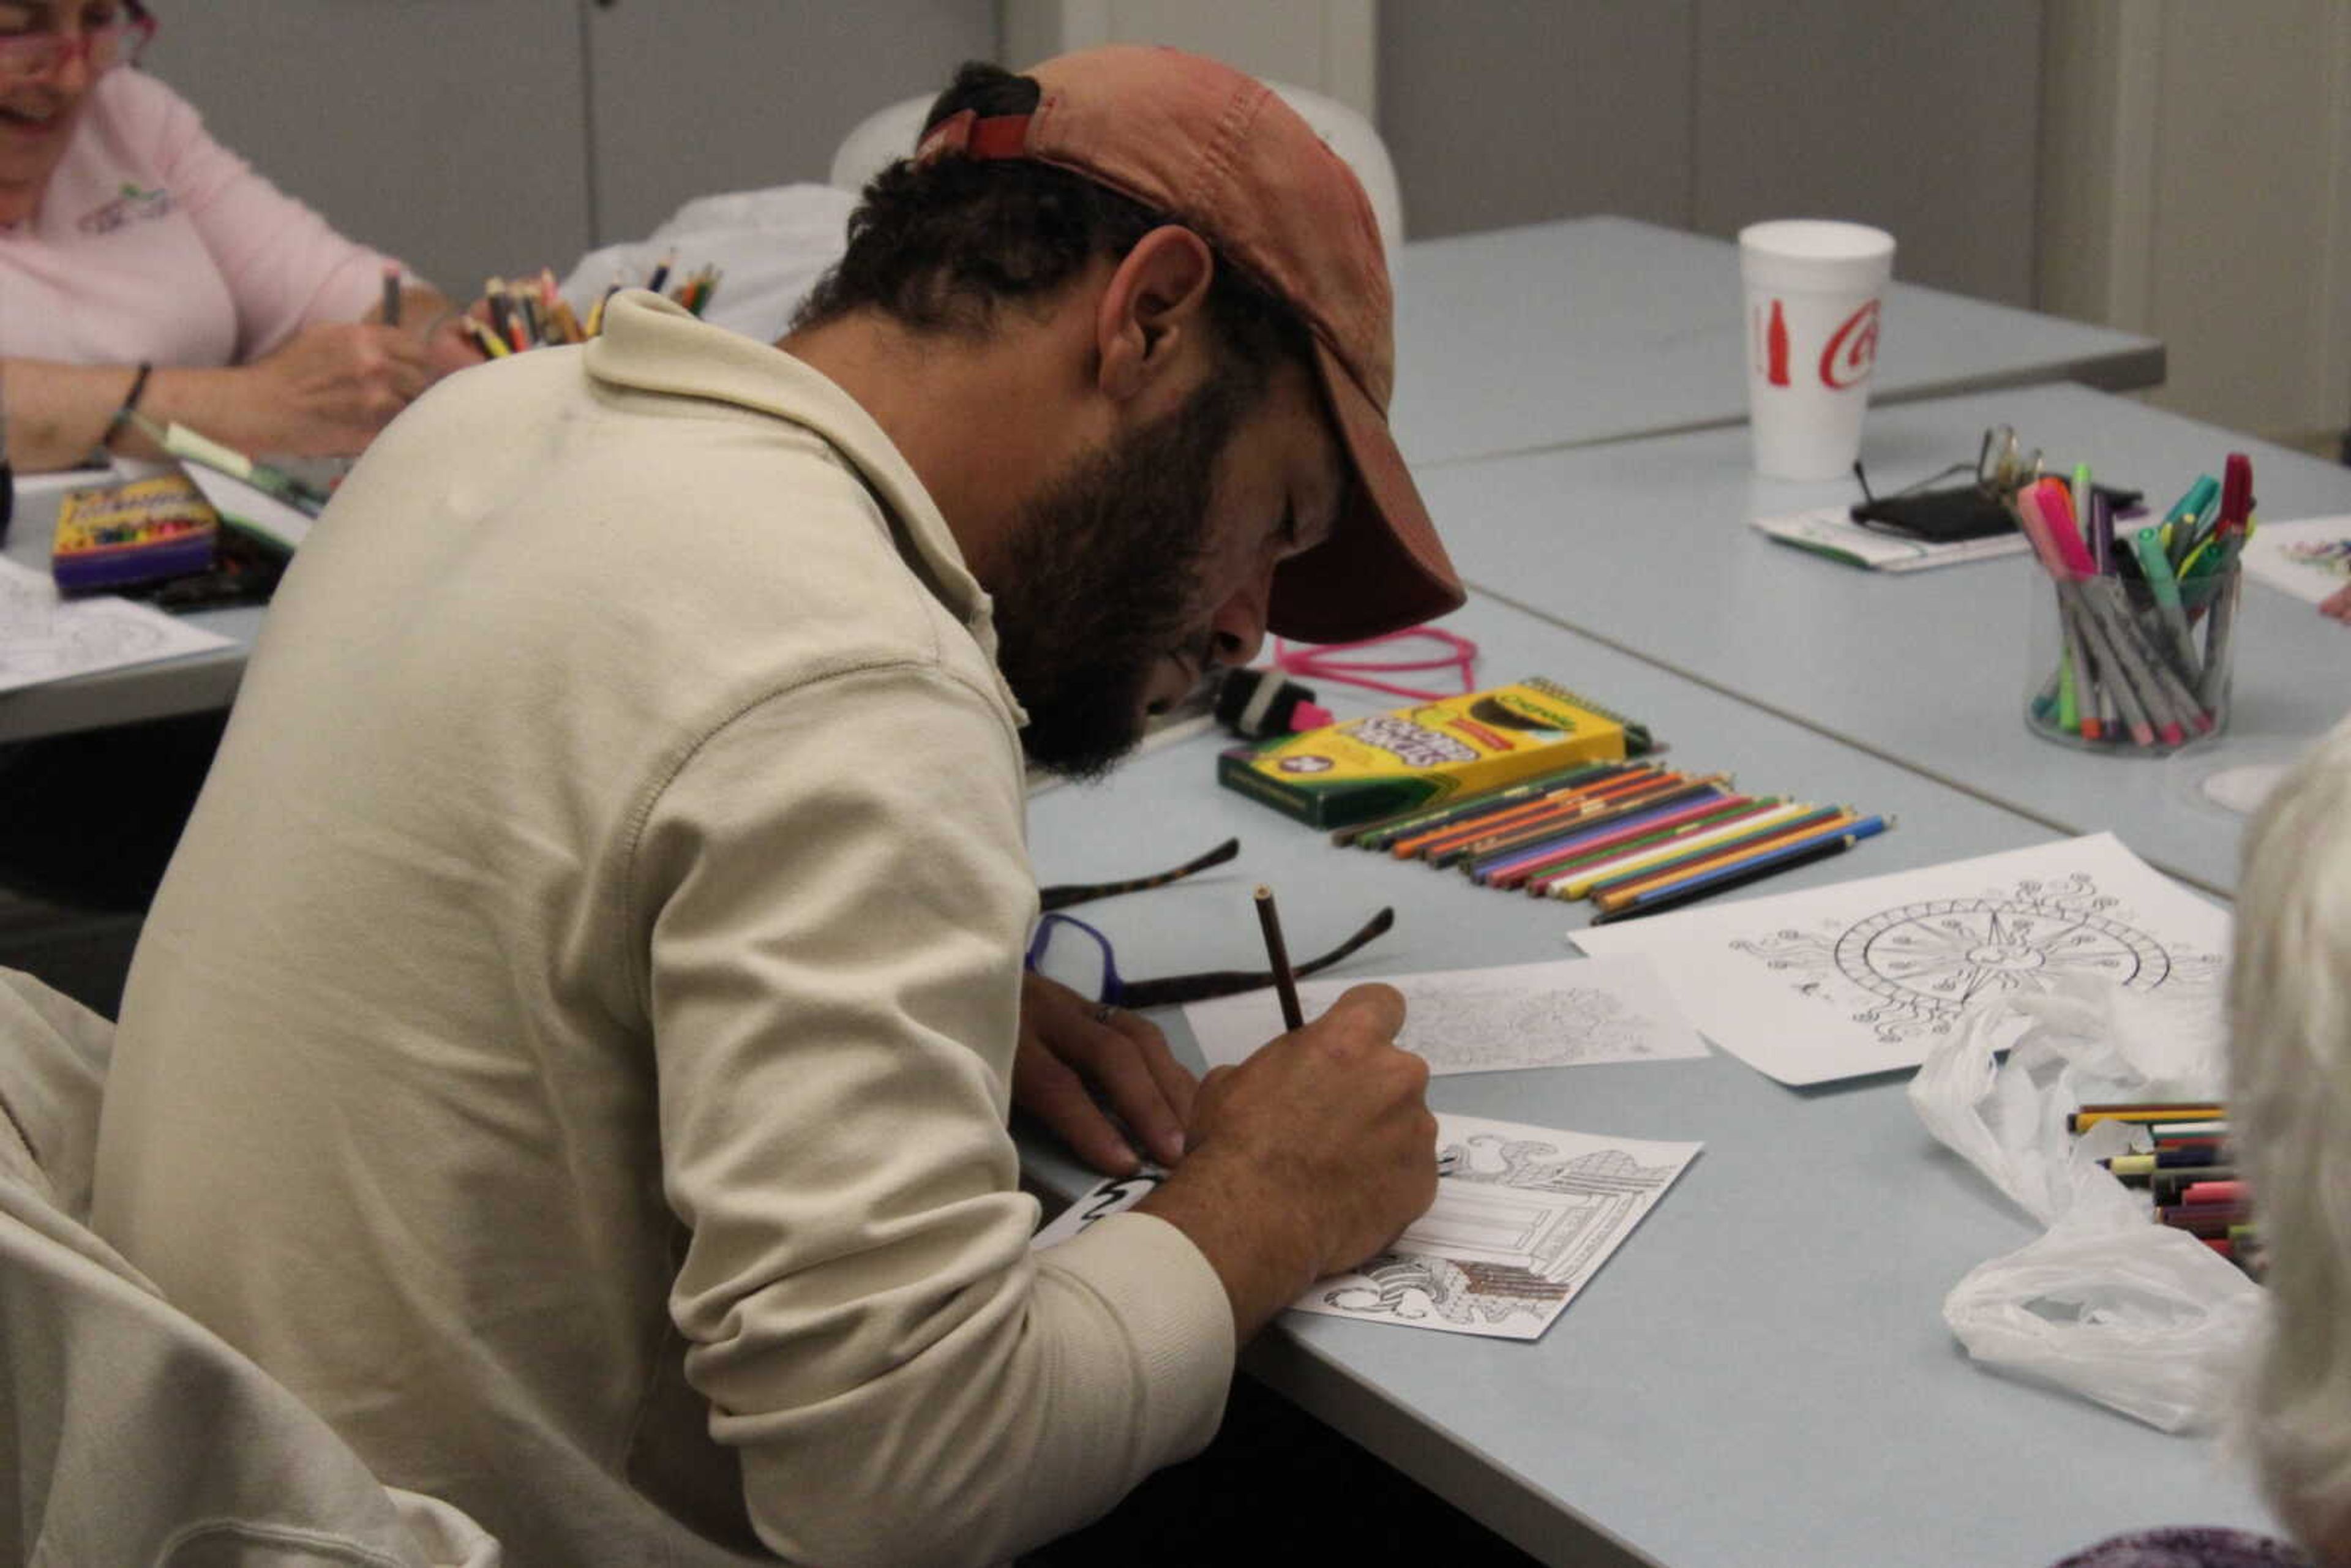 Steven Dusterhoft expresses himself through design at Cape Girardeau Public Library’s “Coloring for Adults” event on Oct. 24.